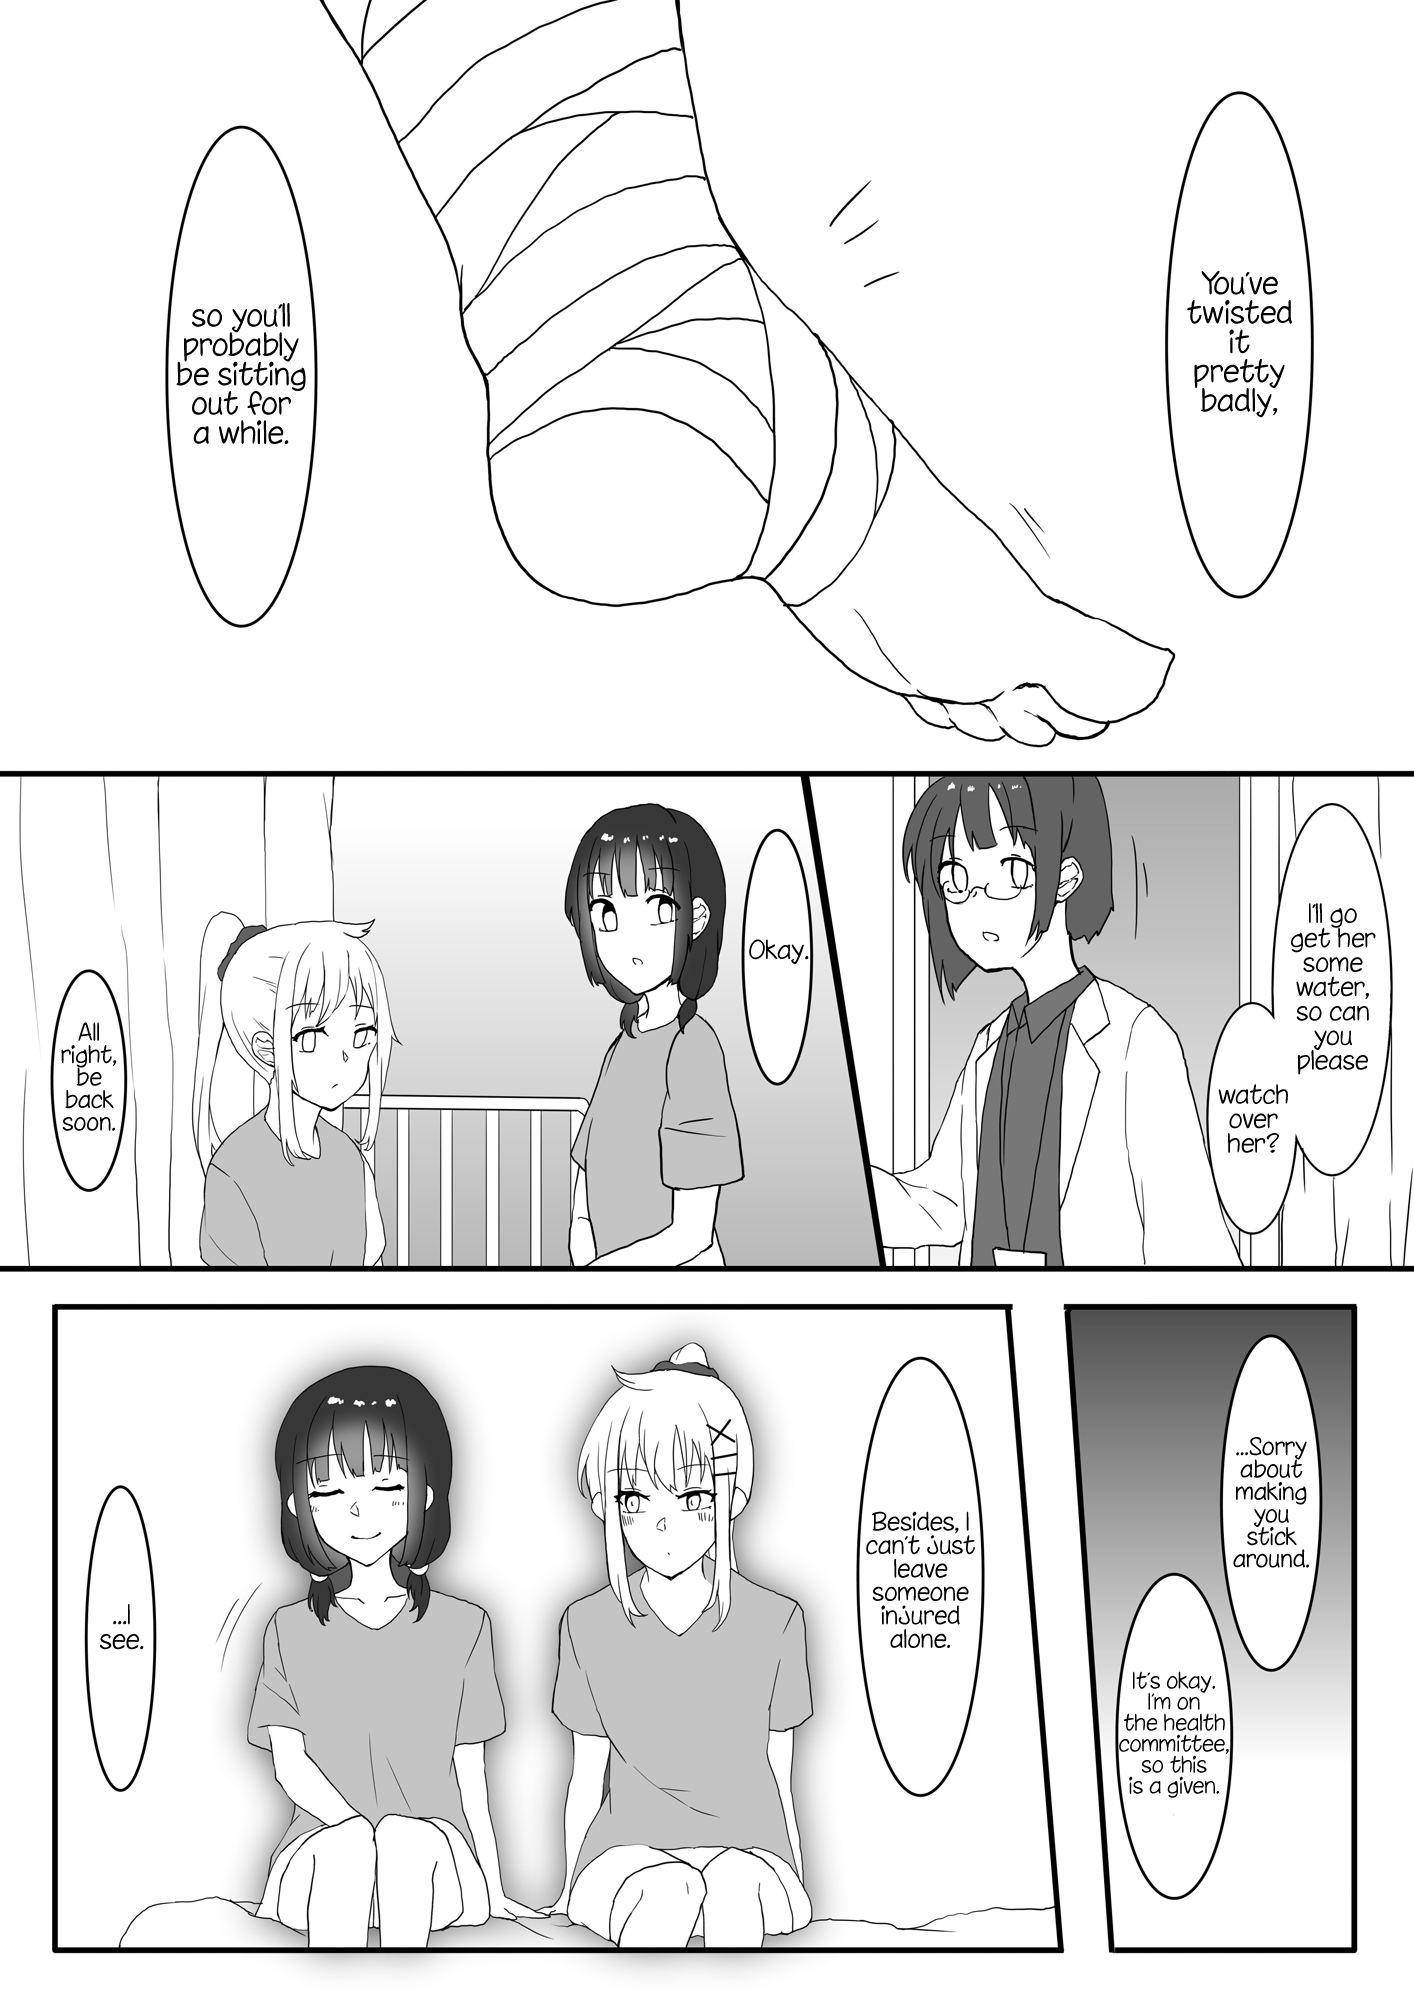 a Yuri Manga Between a Delinquent And a Quiet Girl That Starts From a Misunderstanding - chapter 4 - #2